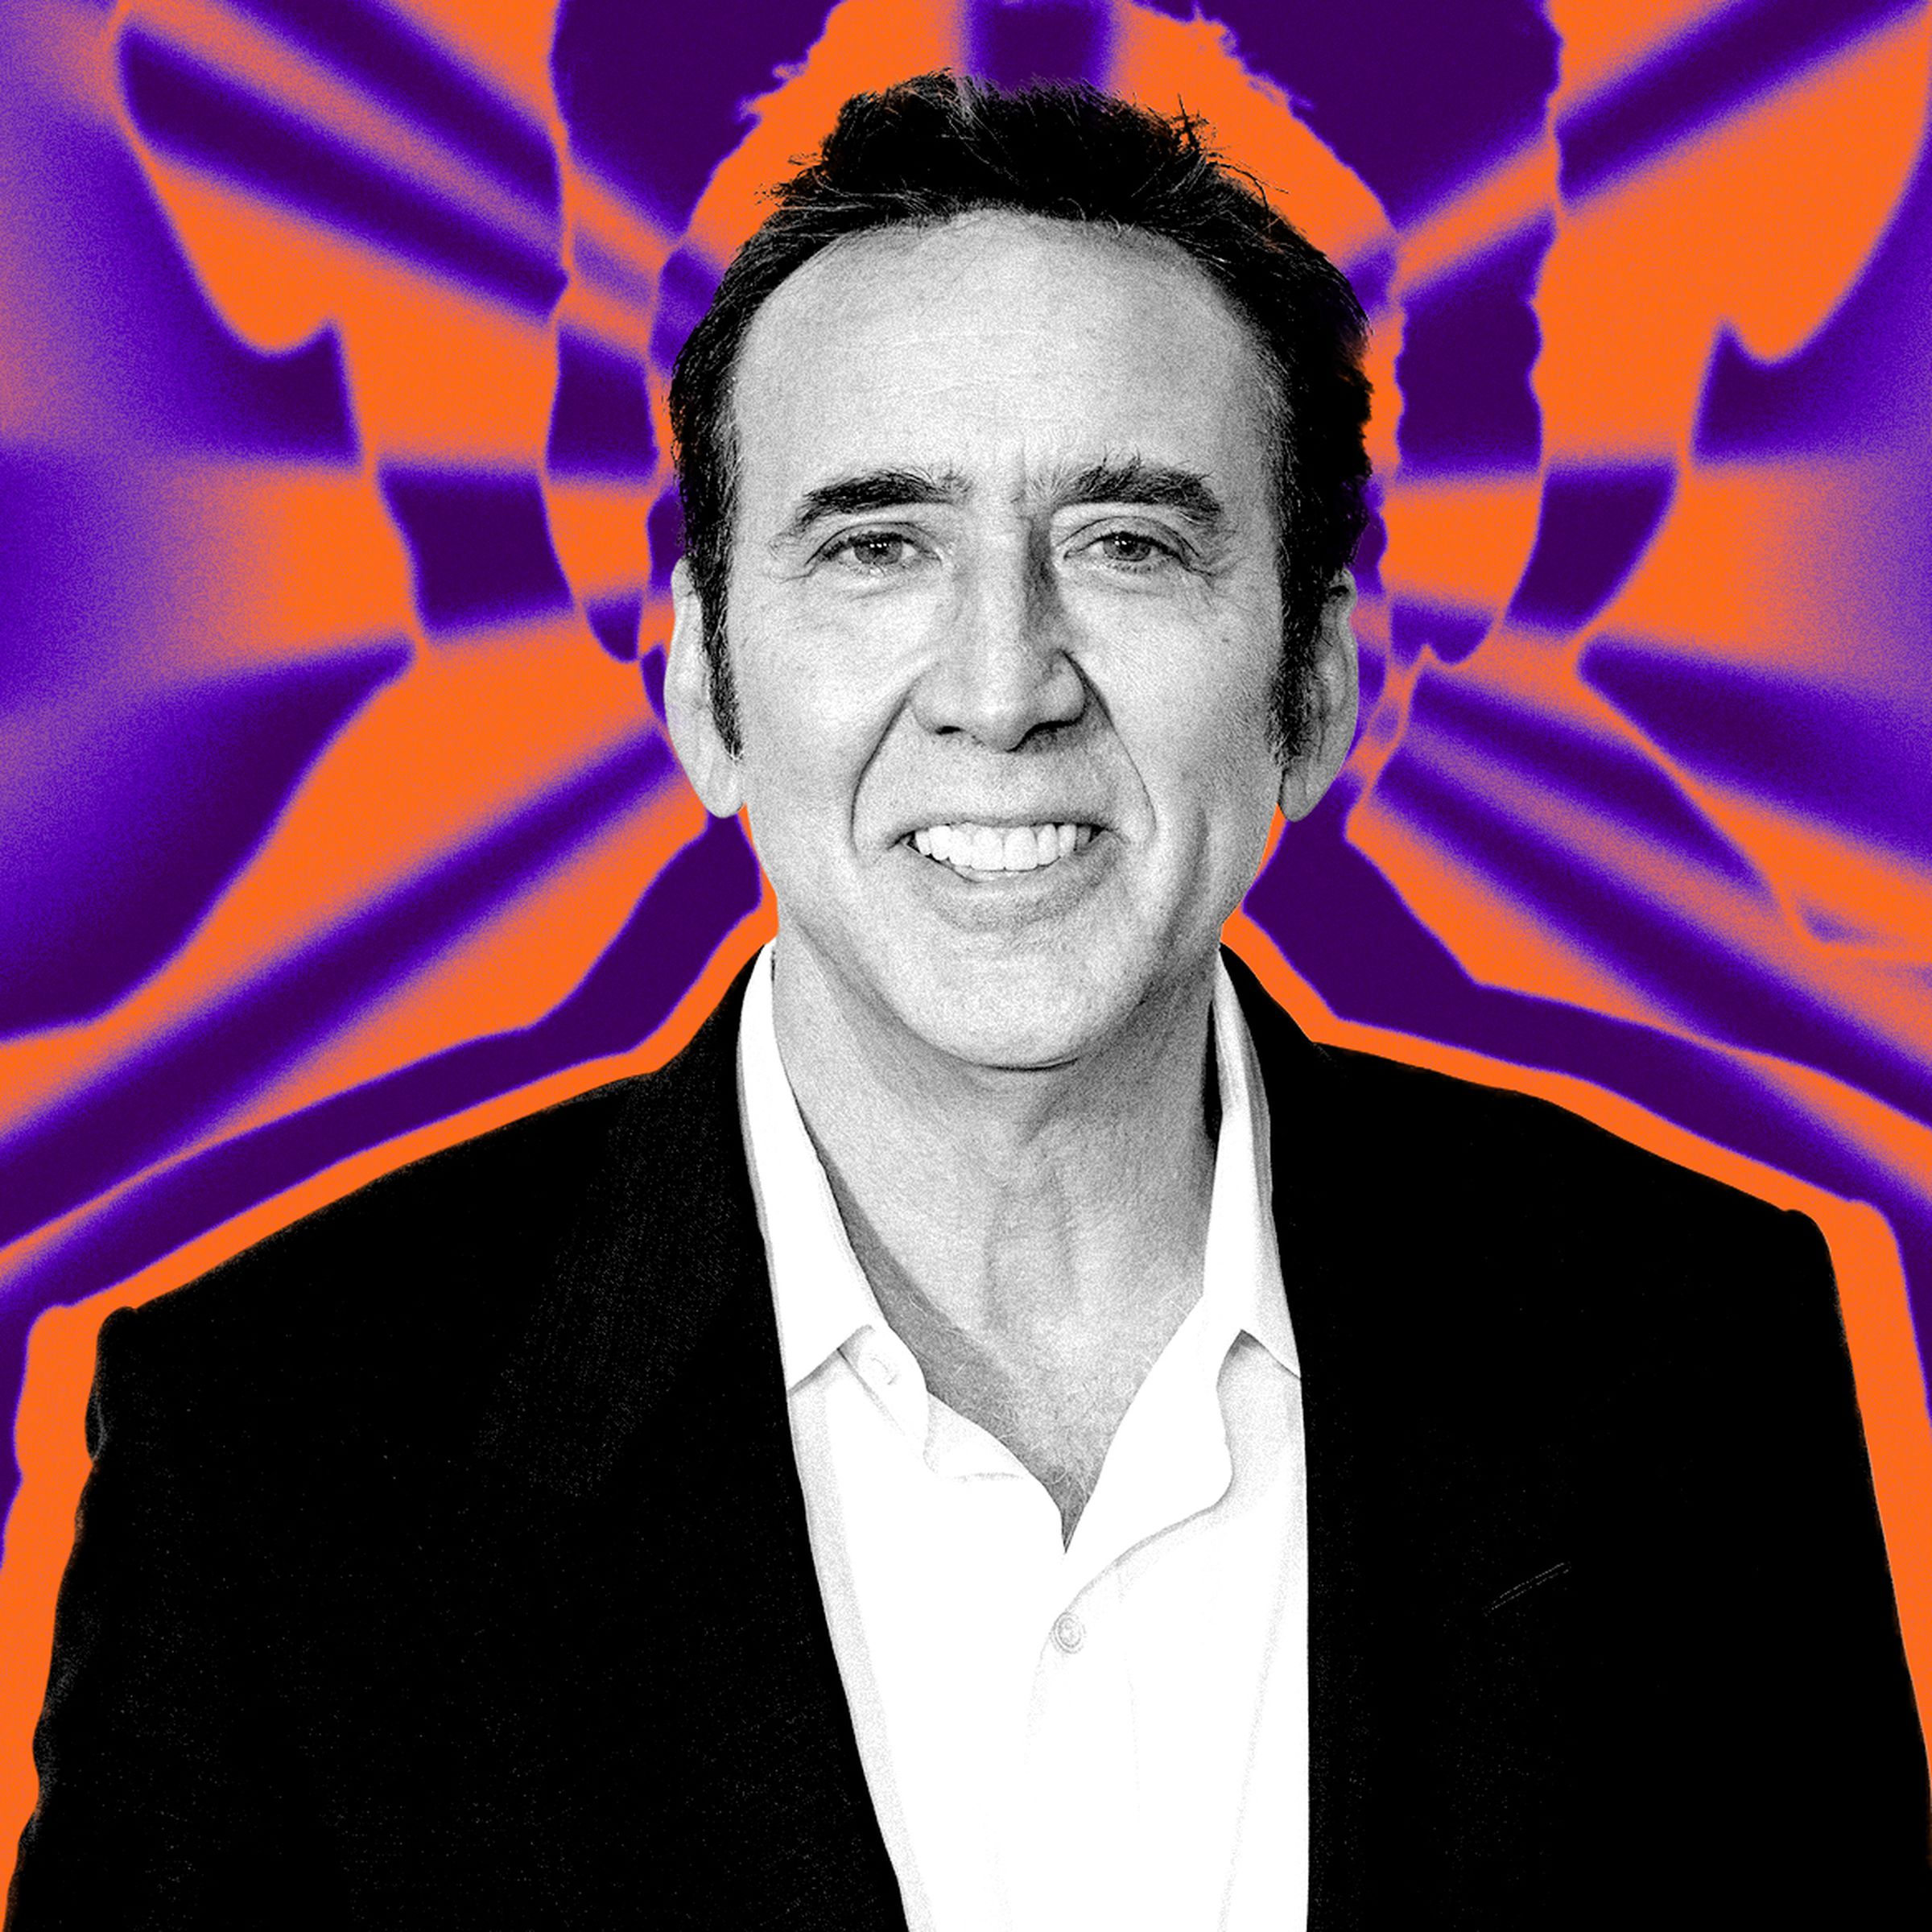 Photo illustration of Nicolas Cage in front of a vibrant background.